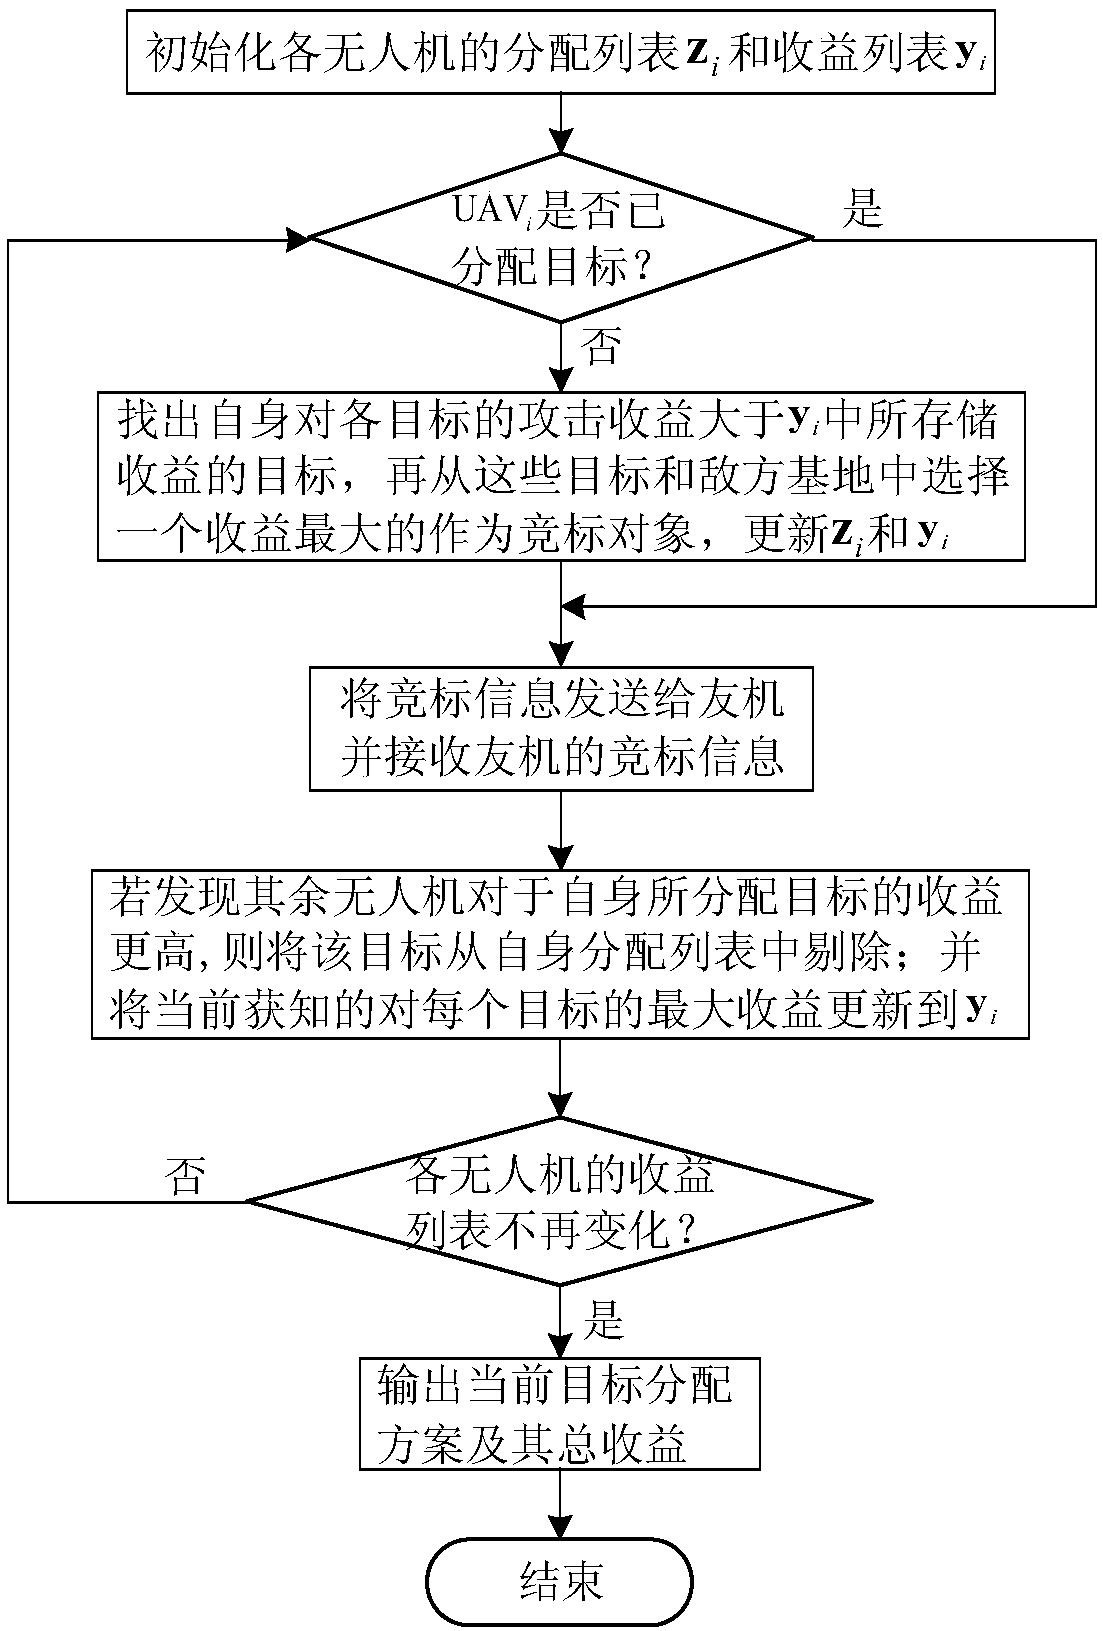 Decision-making method for large-scale unmanned aerial vehicle (UAV) cluster dynamic confrontation